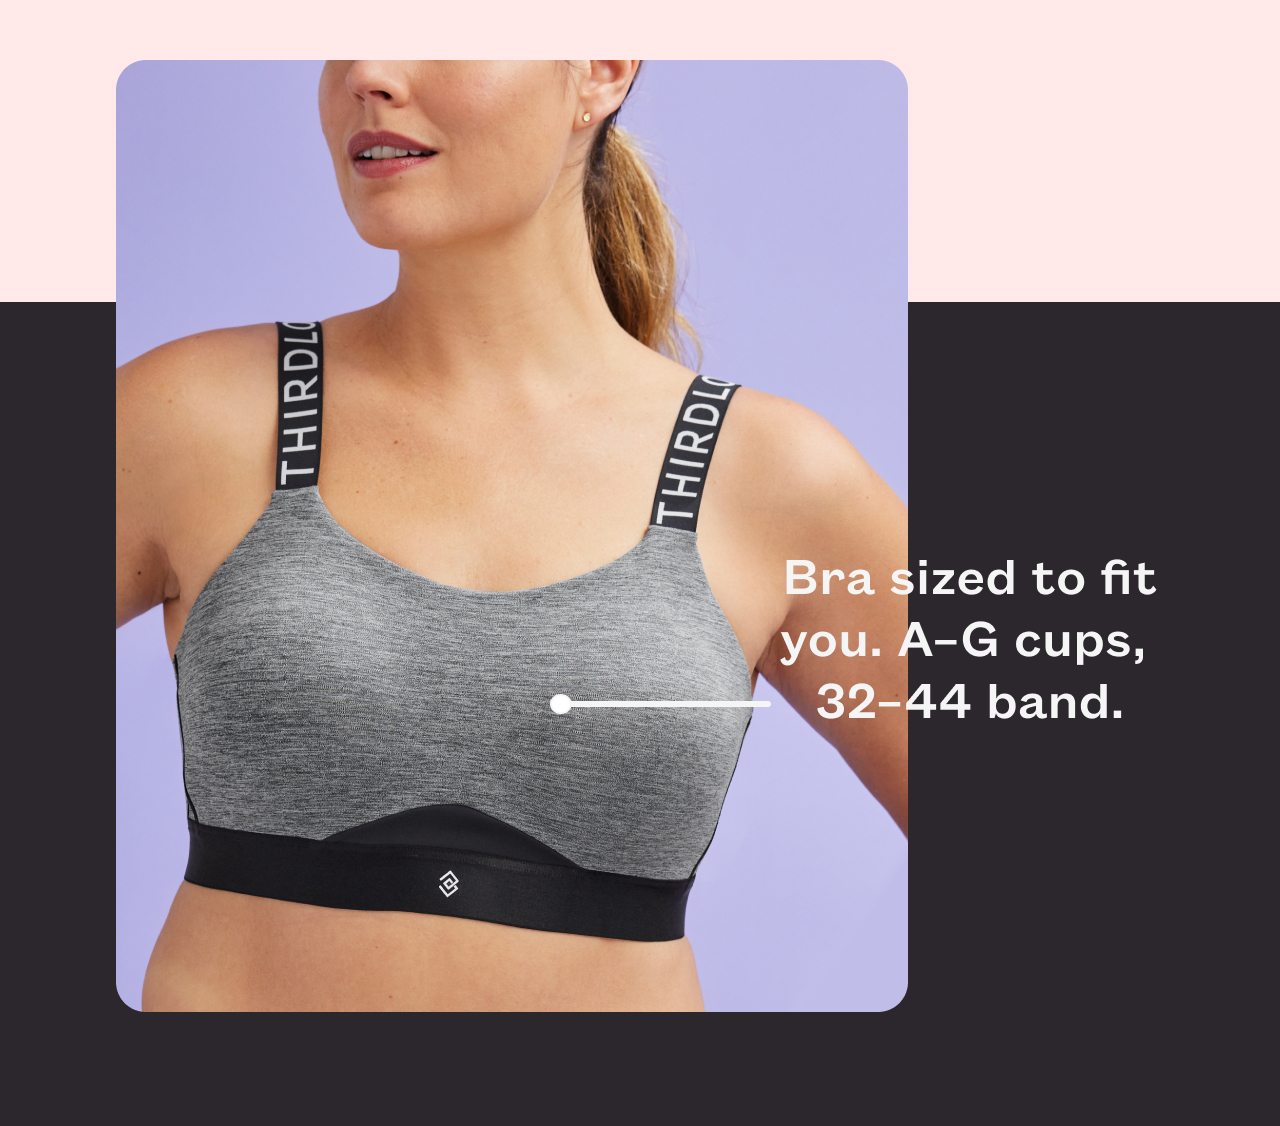 Bra sized to fit you. A-G cups, 32-44 band.